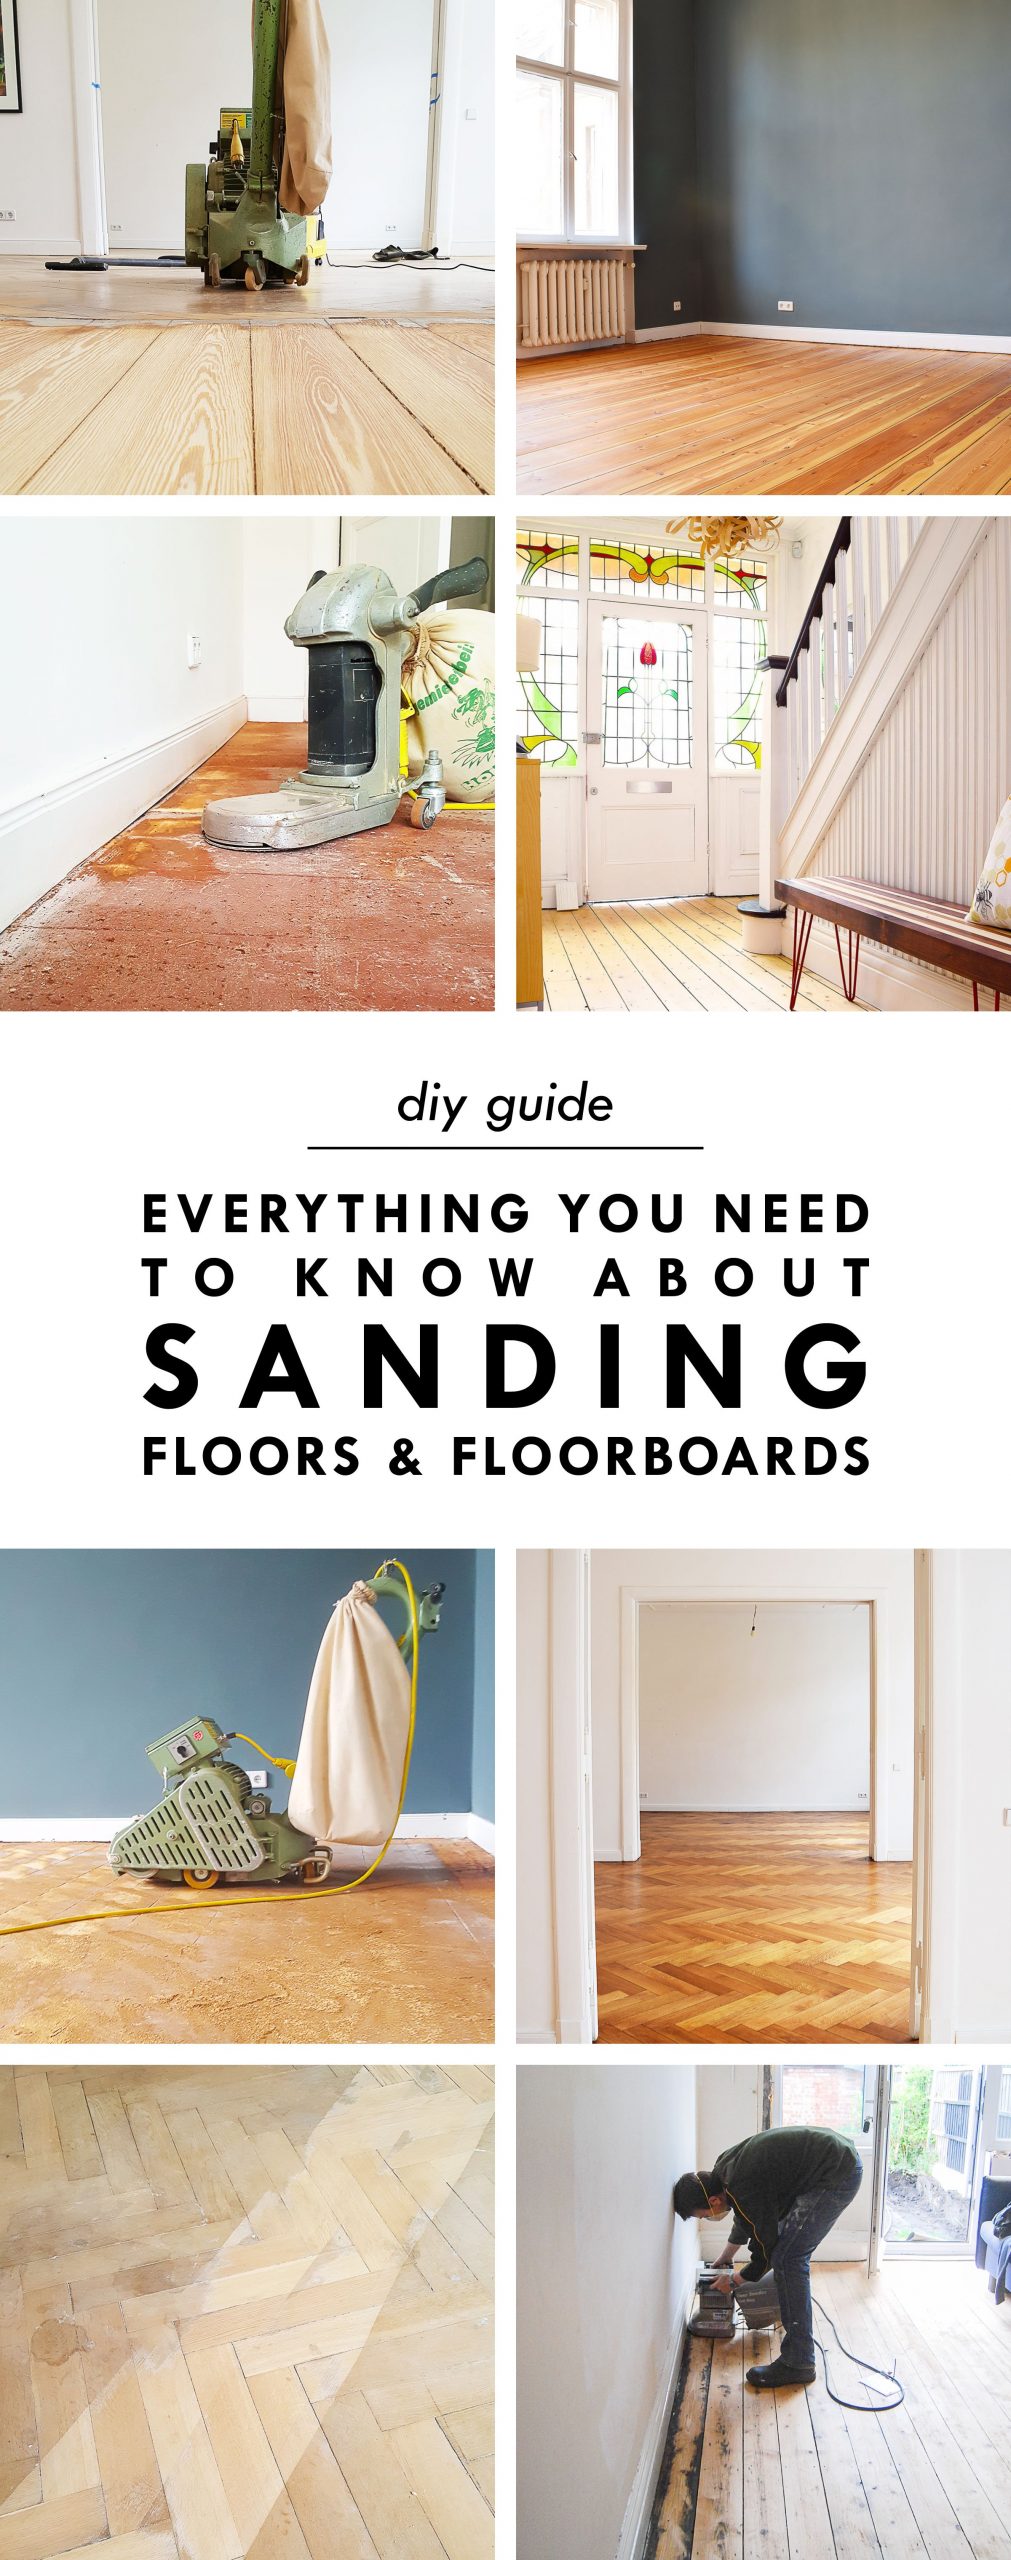 https://www.littlehouseonthecorner.com/wp-content/uploads/2019/09/EVERYTHING-YOU%E2%80%99VE-EVER-WANTED-TO-KNOW-ABOUT-SANDING-WOODEN-FLOORS-FLOORBOARDS-Little-House-On-The-Corner-scaled.jpg